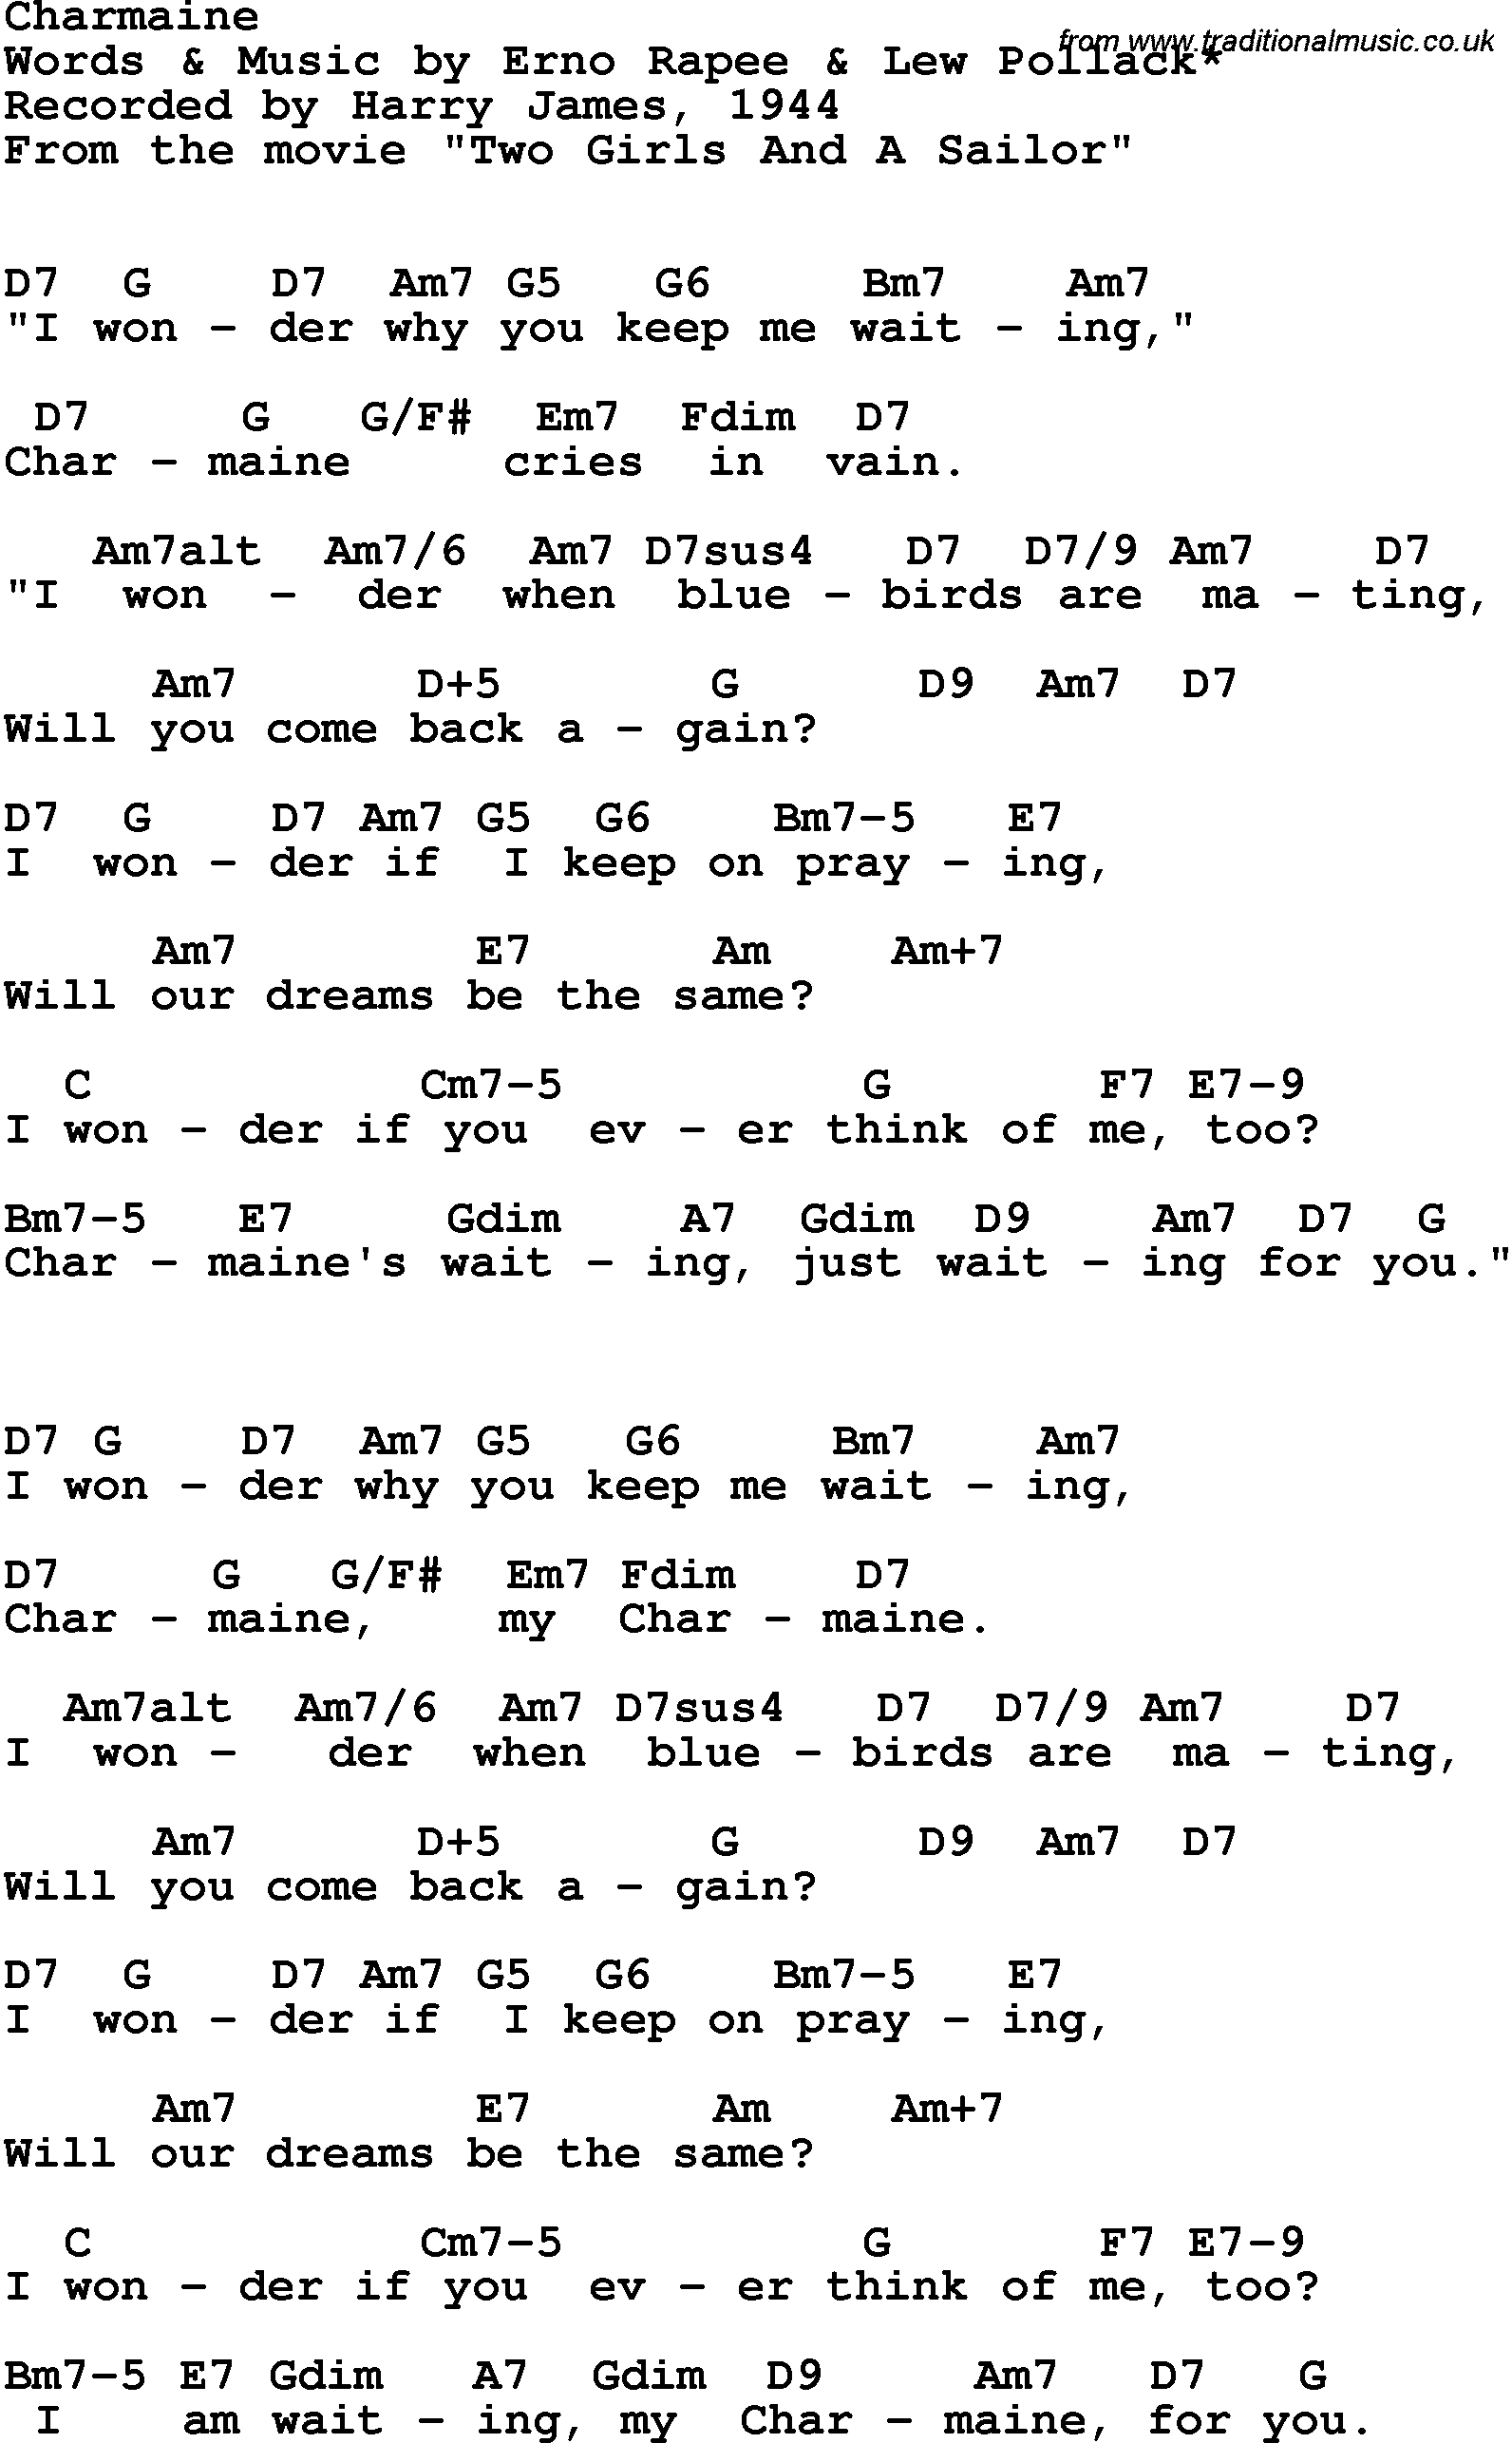 Song Lyrics with guitar chords for Charmaine - Harry James, 1944